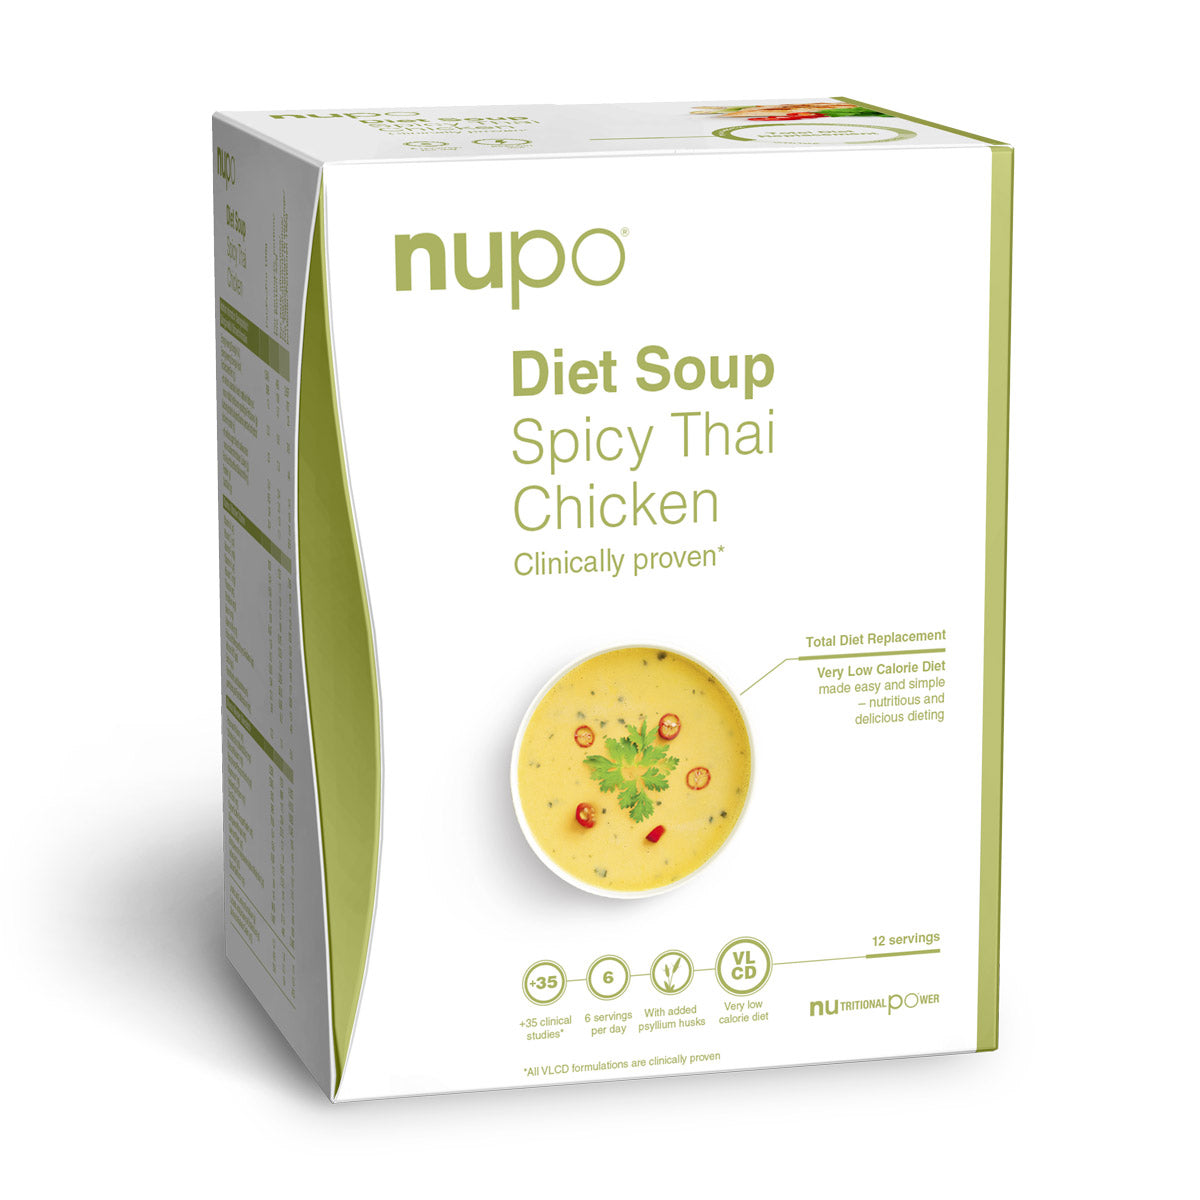 Se Nupo Diet Soup (384g) - Spicy Thai Chicken hos Muscle House